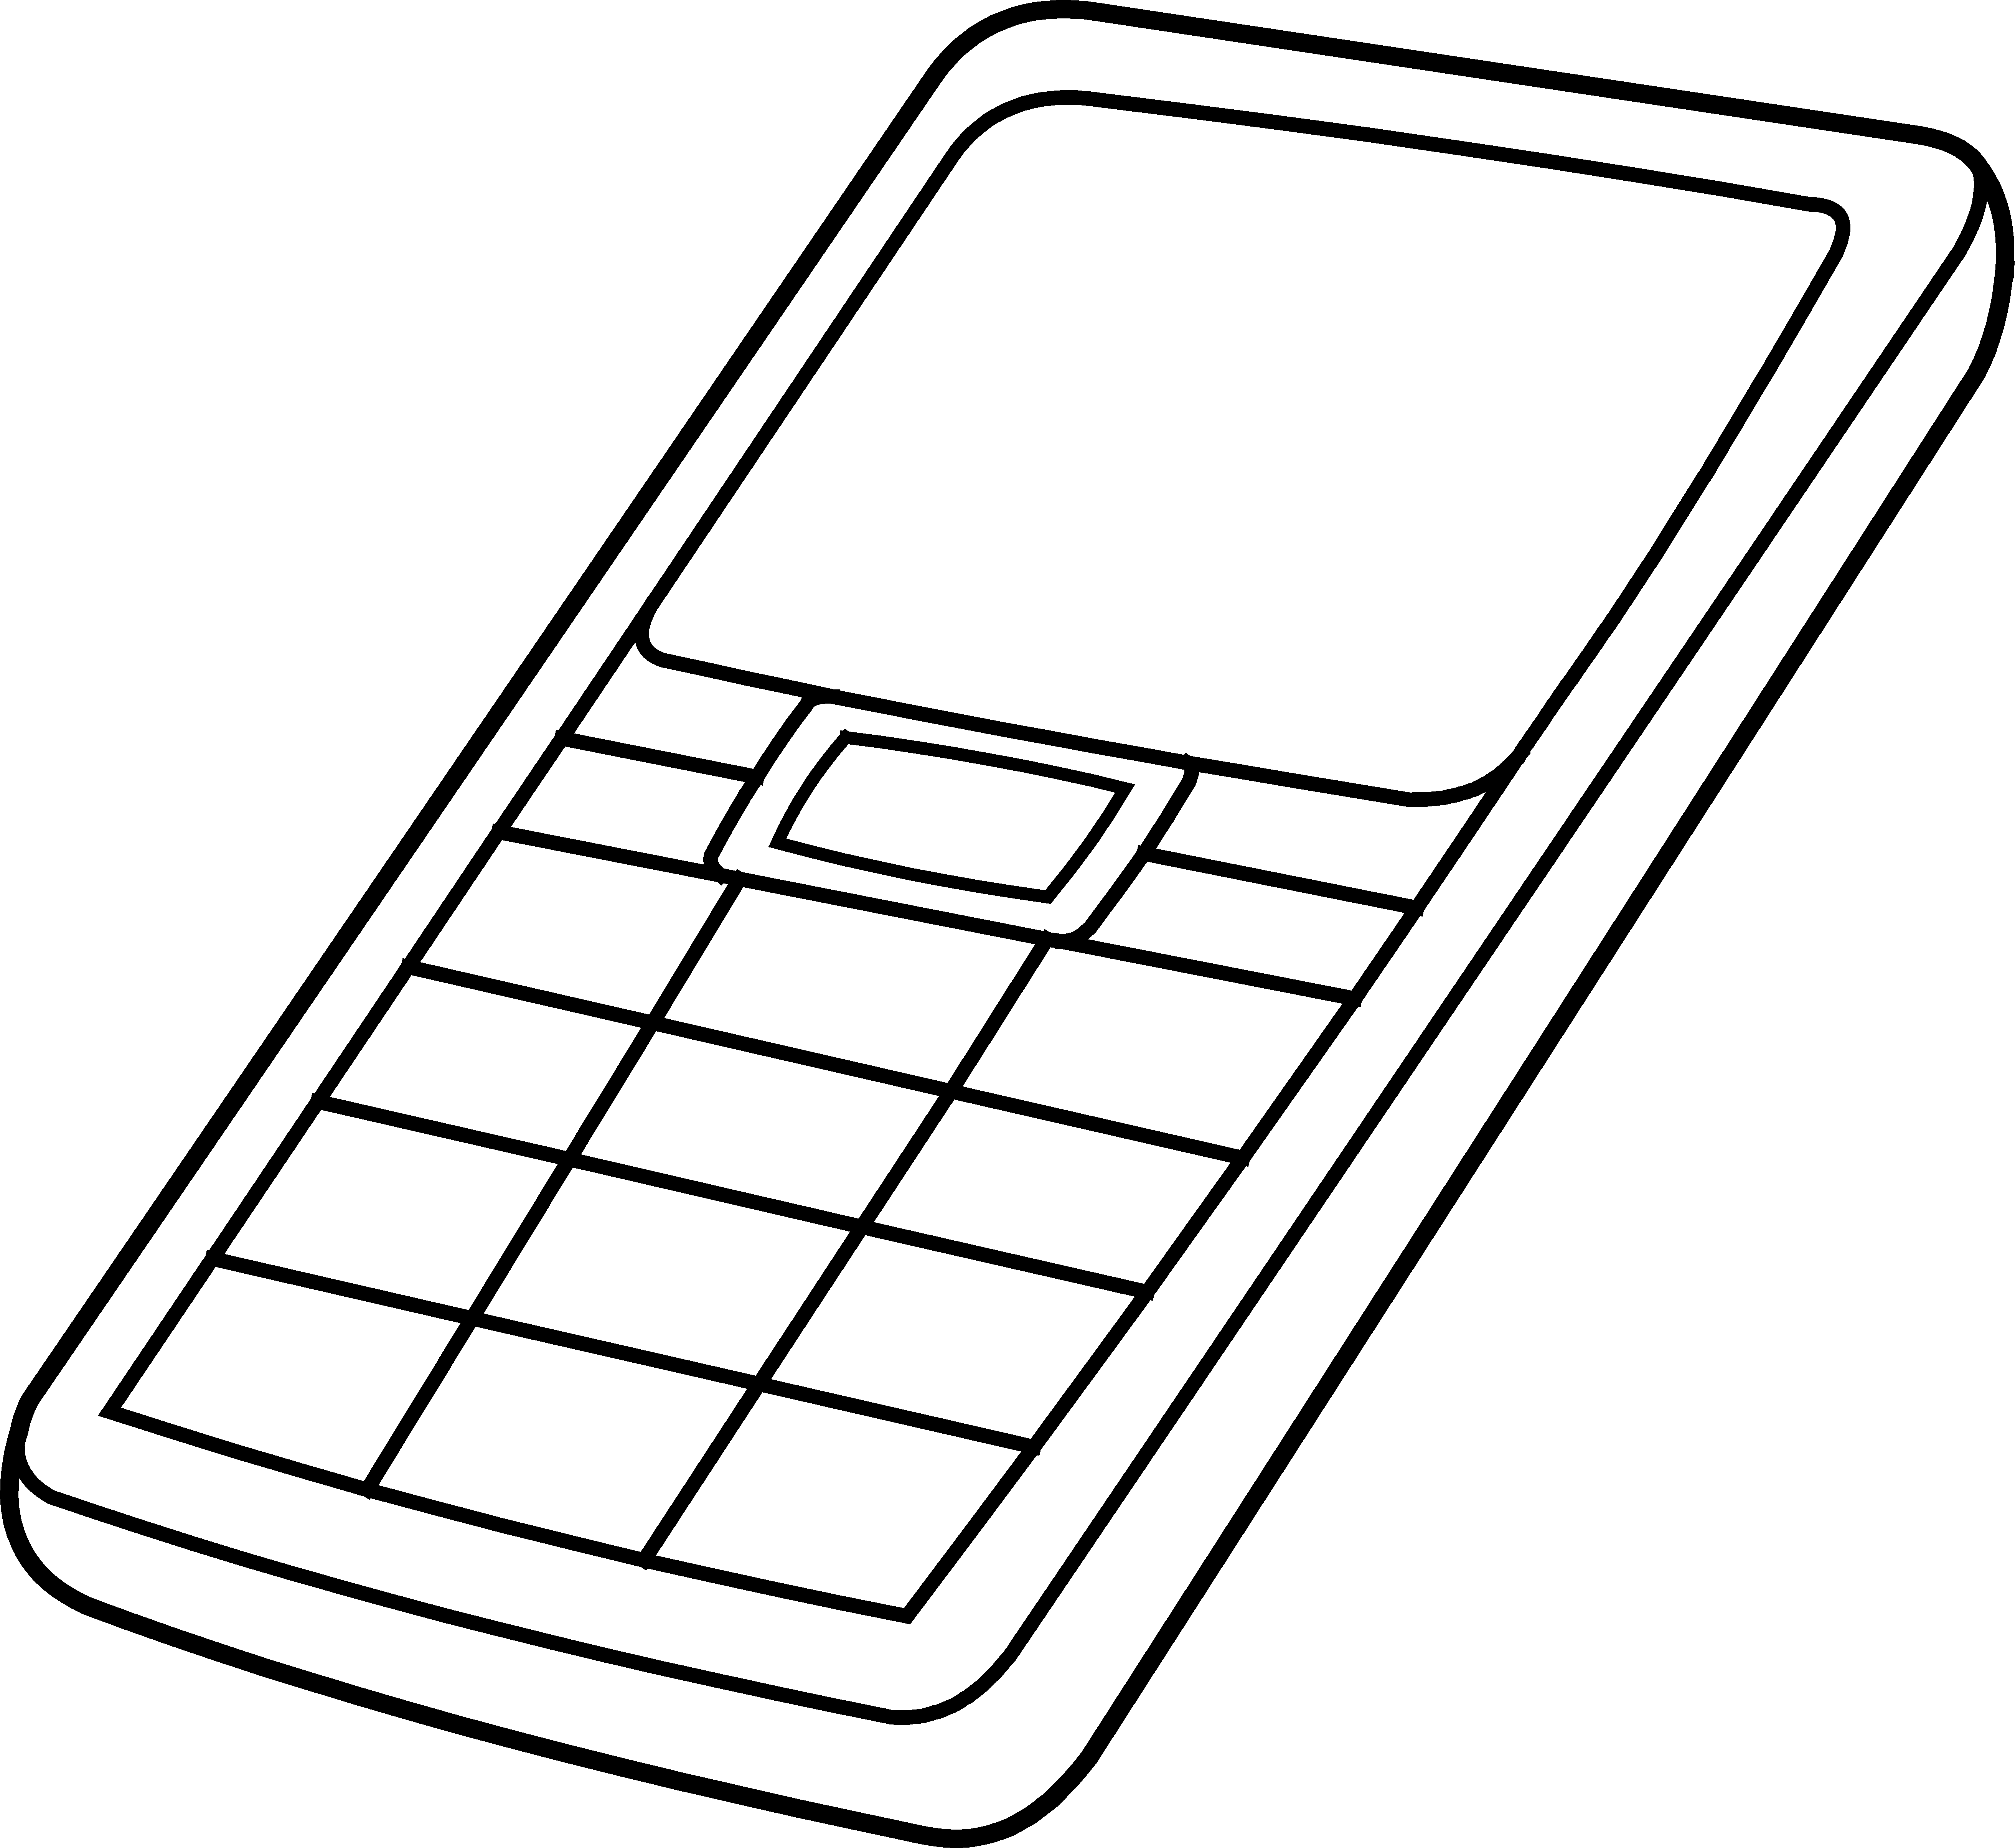 Cell phone clipart black and white 6 » Clipart Station.